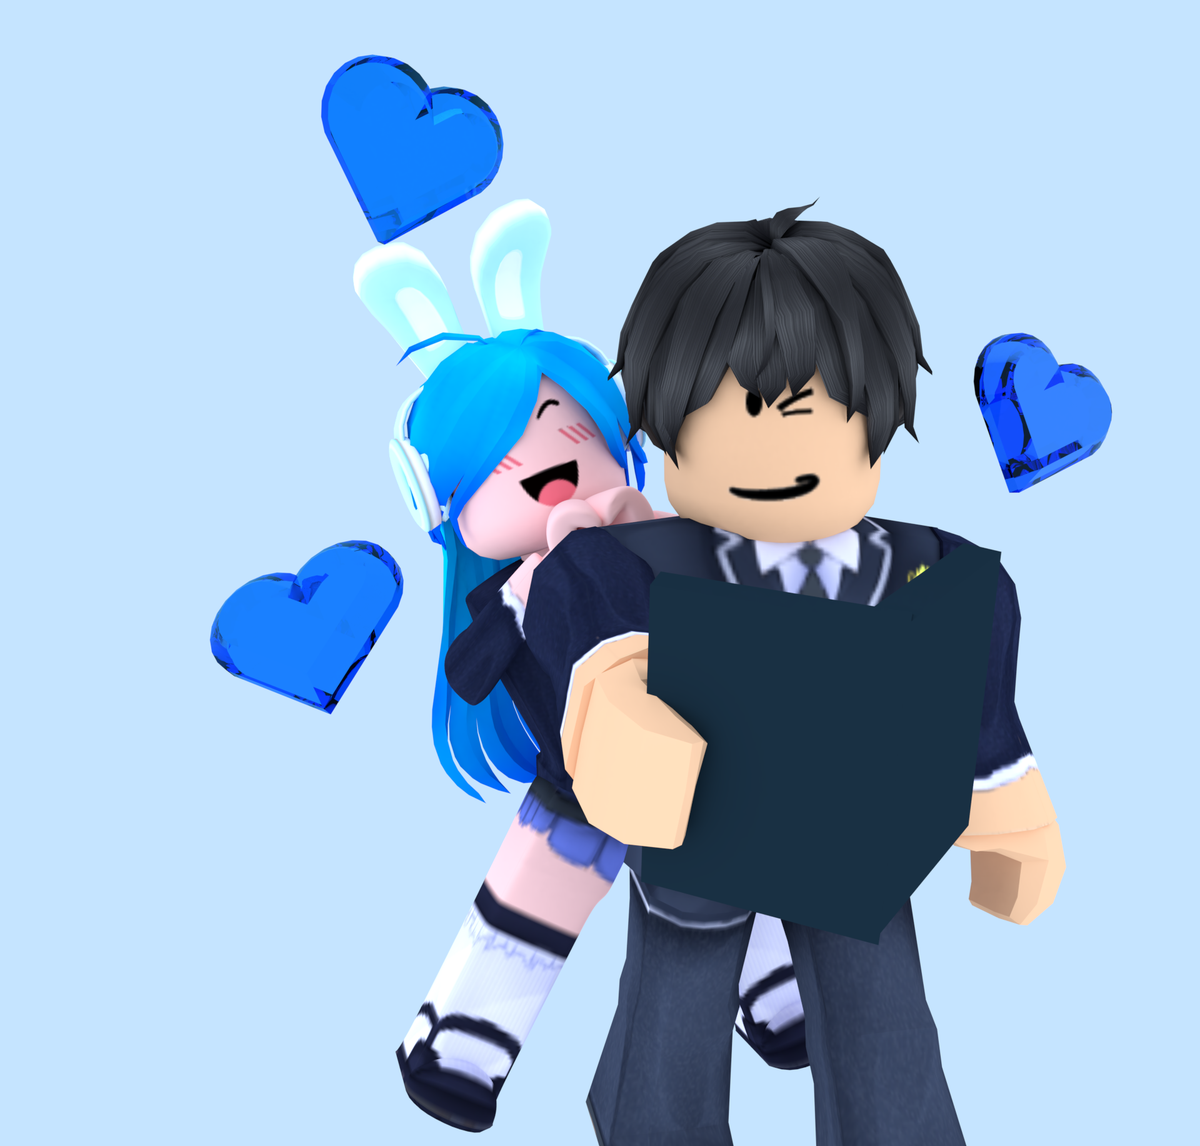 Iibrxkengerbun On Twitter Last Comms For Basicsethrblx Sorry If I Annoyed Anyone Note If Some Of My Best Friends Paid Me For A Commission I Feel Bad So - me and my best friend roblox best friend gfx png image with